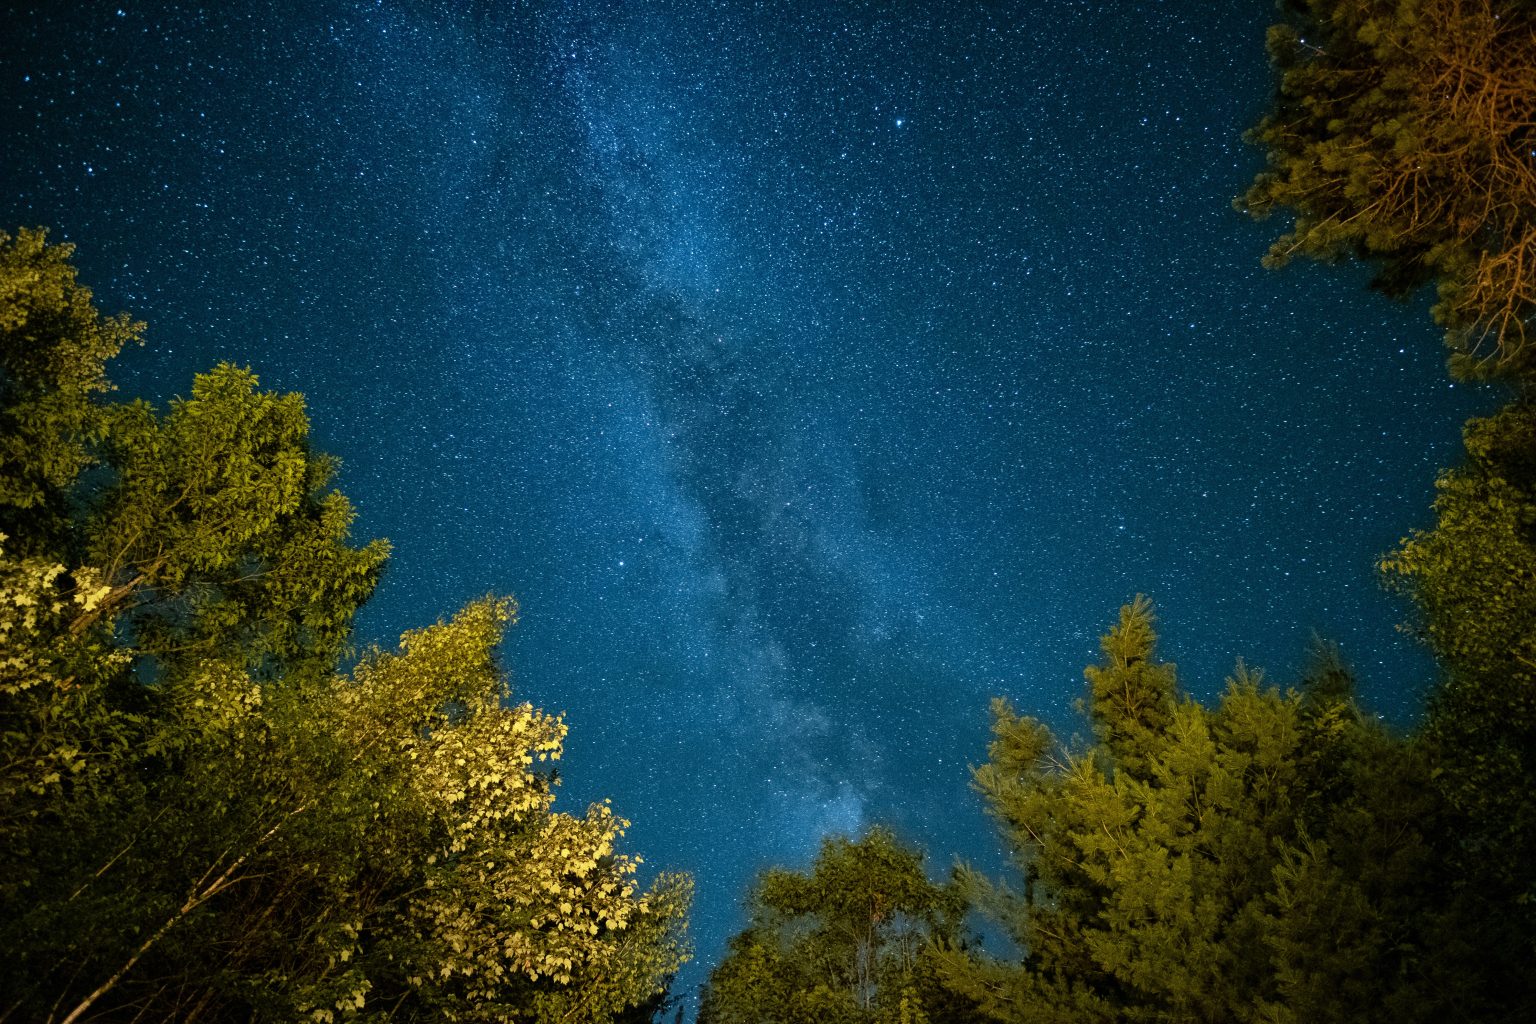 The milky way galaxy shines bright above some trees in the forest. Photo contributed by Jeff Golenski to the WordPress Photo Directory.